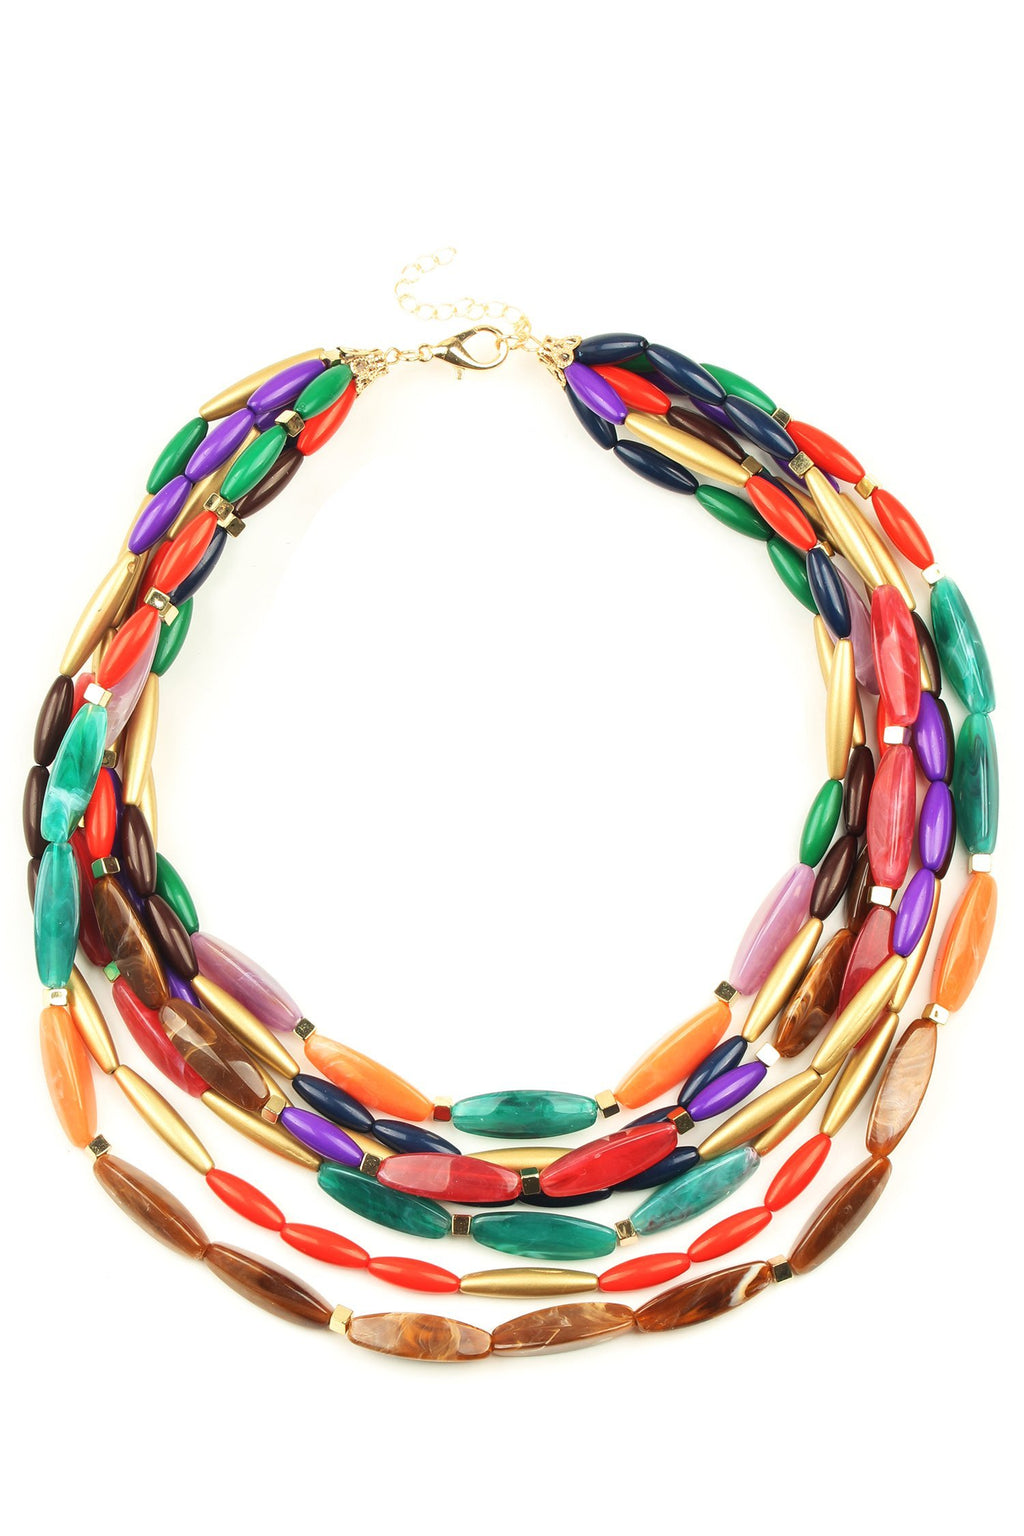 14 inch necklace made up of multiple layered chains of a variety of colorful oval resin beads.